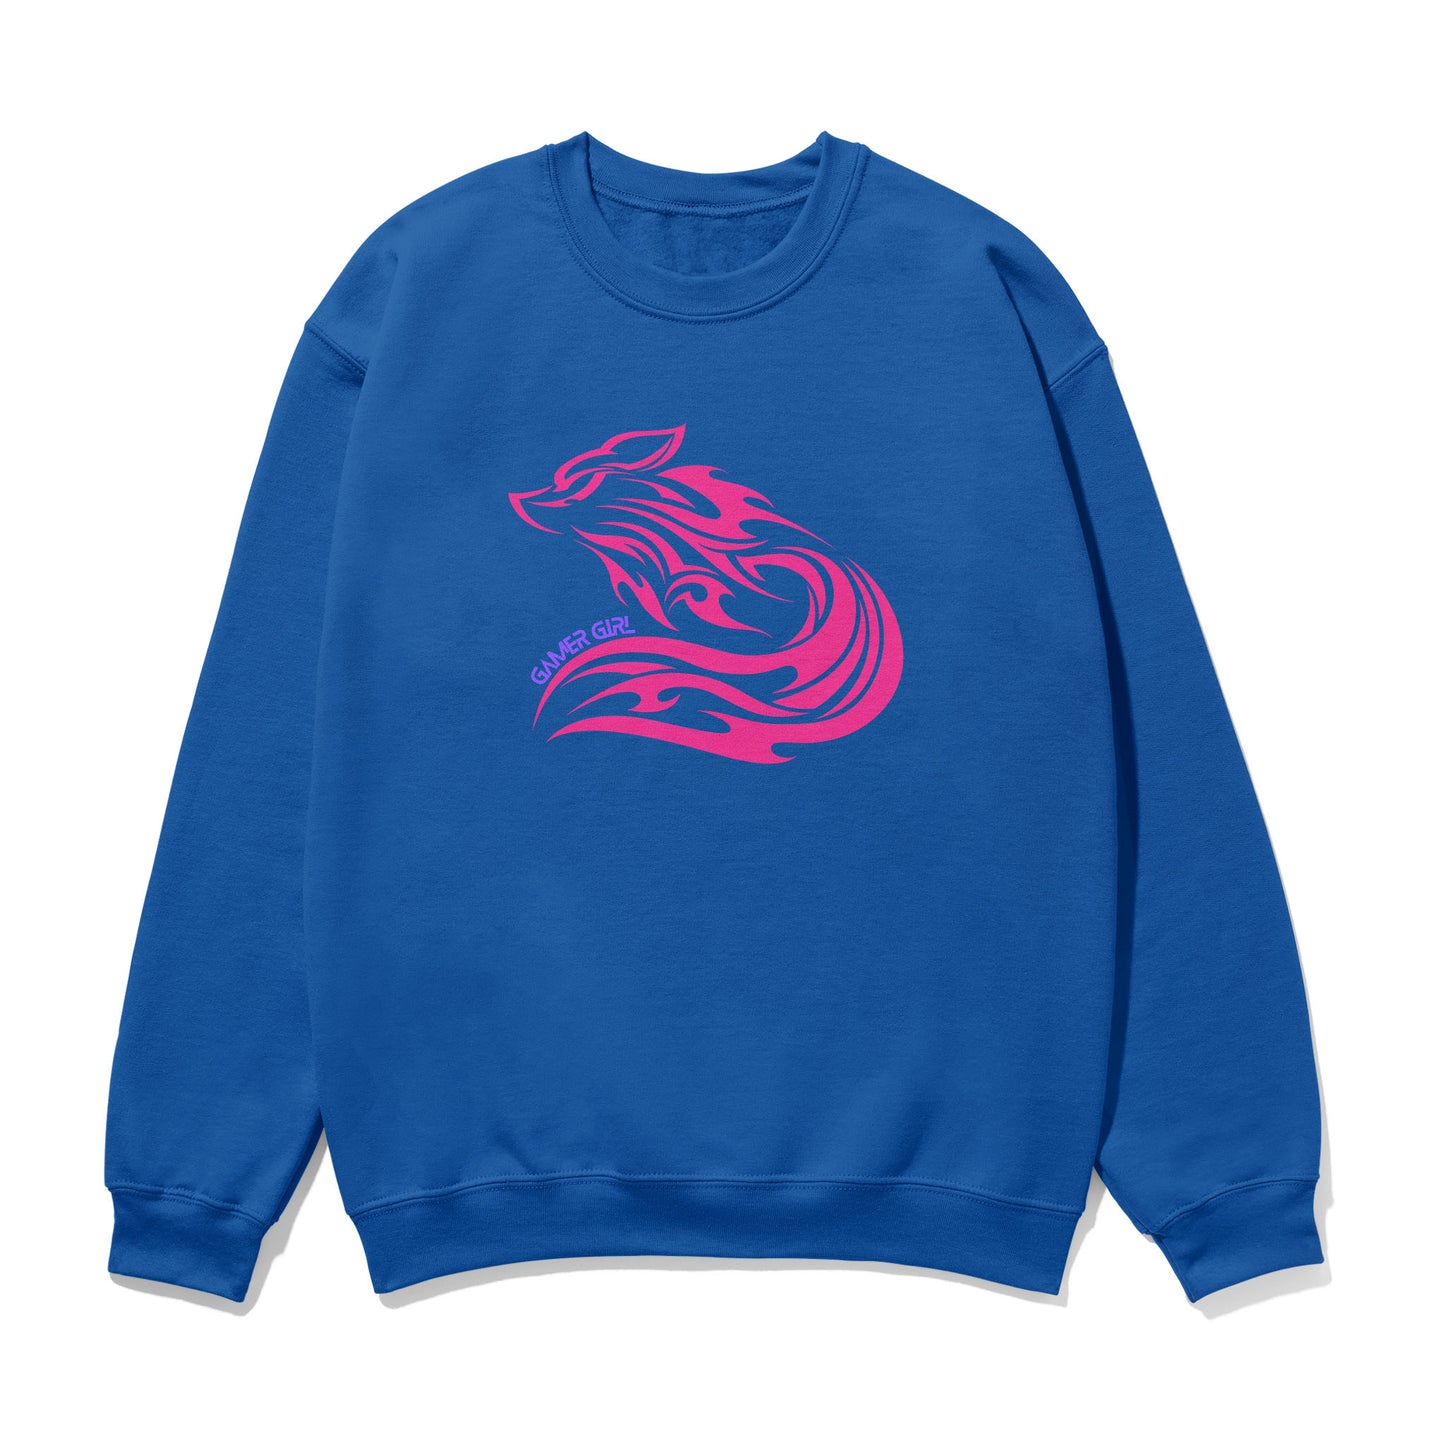 Gamer Girl Pink Fox Unisex Printed Sweatshirt with Sleeve - Perfect for Gaming Enthusiasts